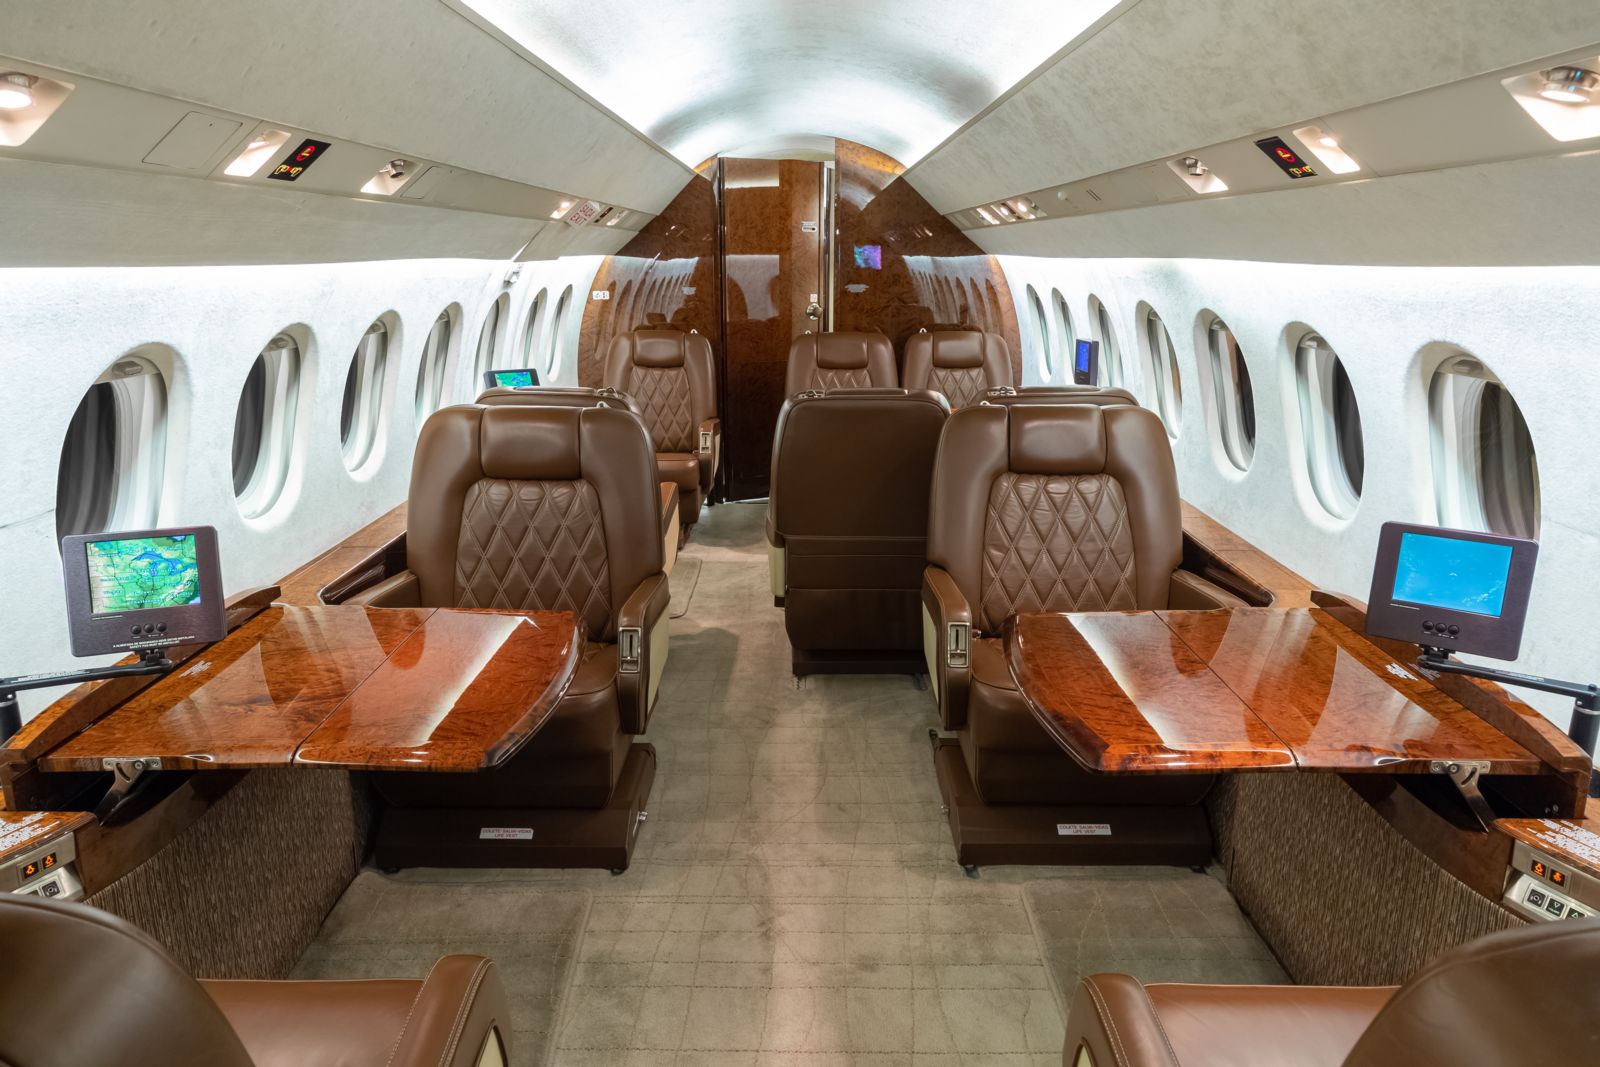 Dassault Falcon 2000  S/N 205 for sale | gallery image: /userfiles/images/205/bfp_6191.jpg